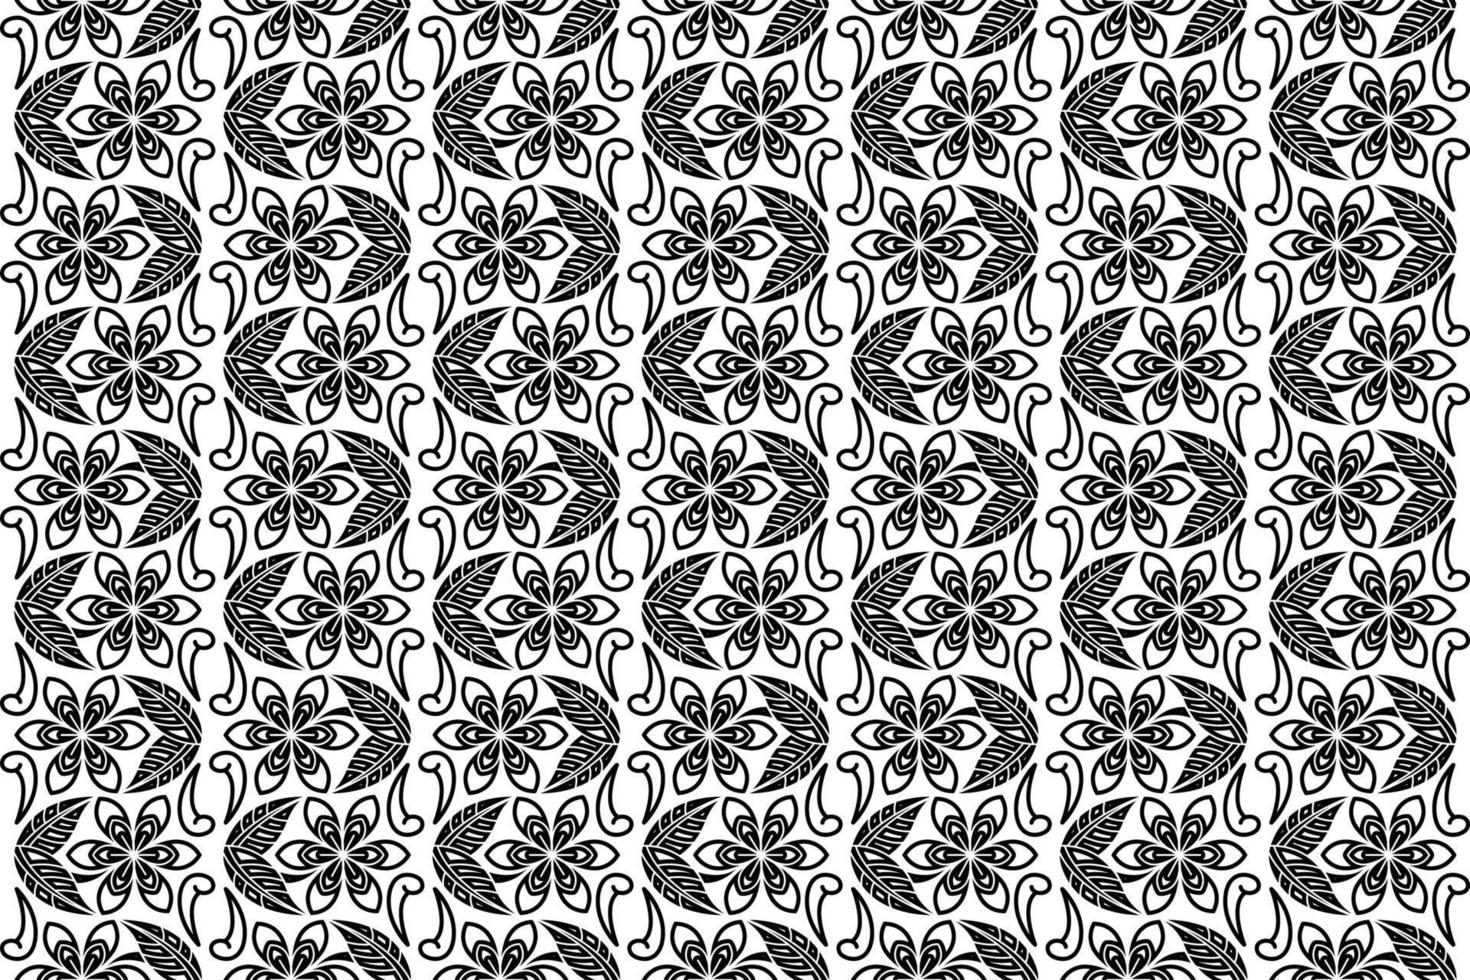 Black and white oriental pattern. Seamless repeating floral elements, background with Arabic ornament. vector